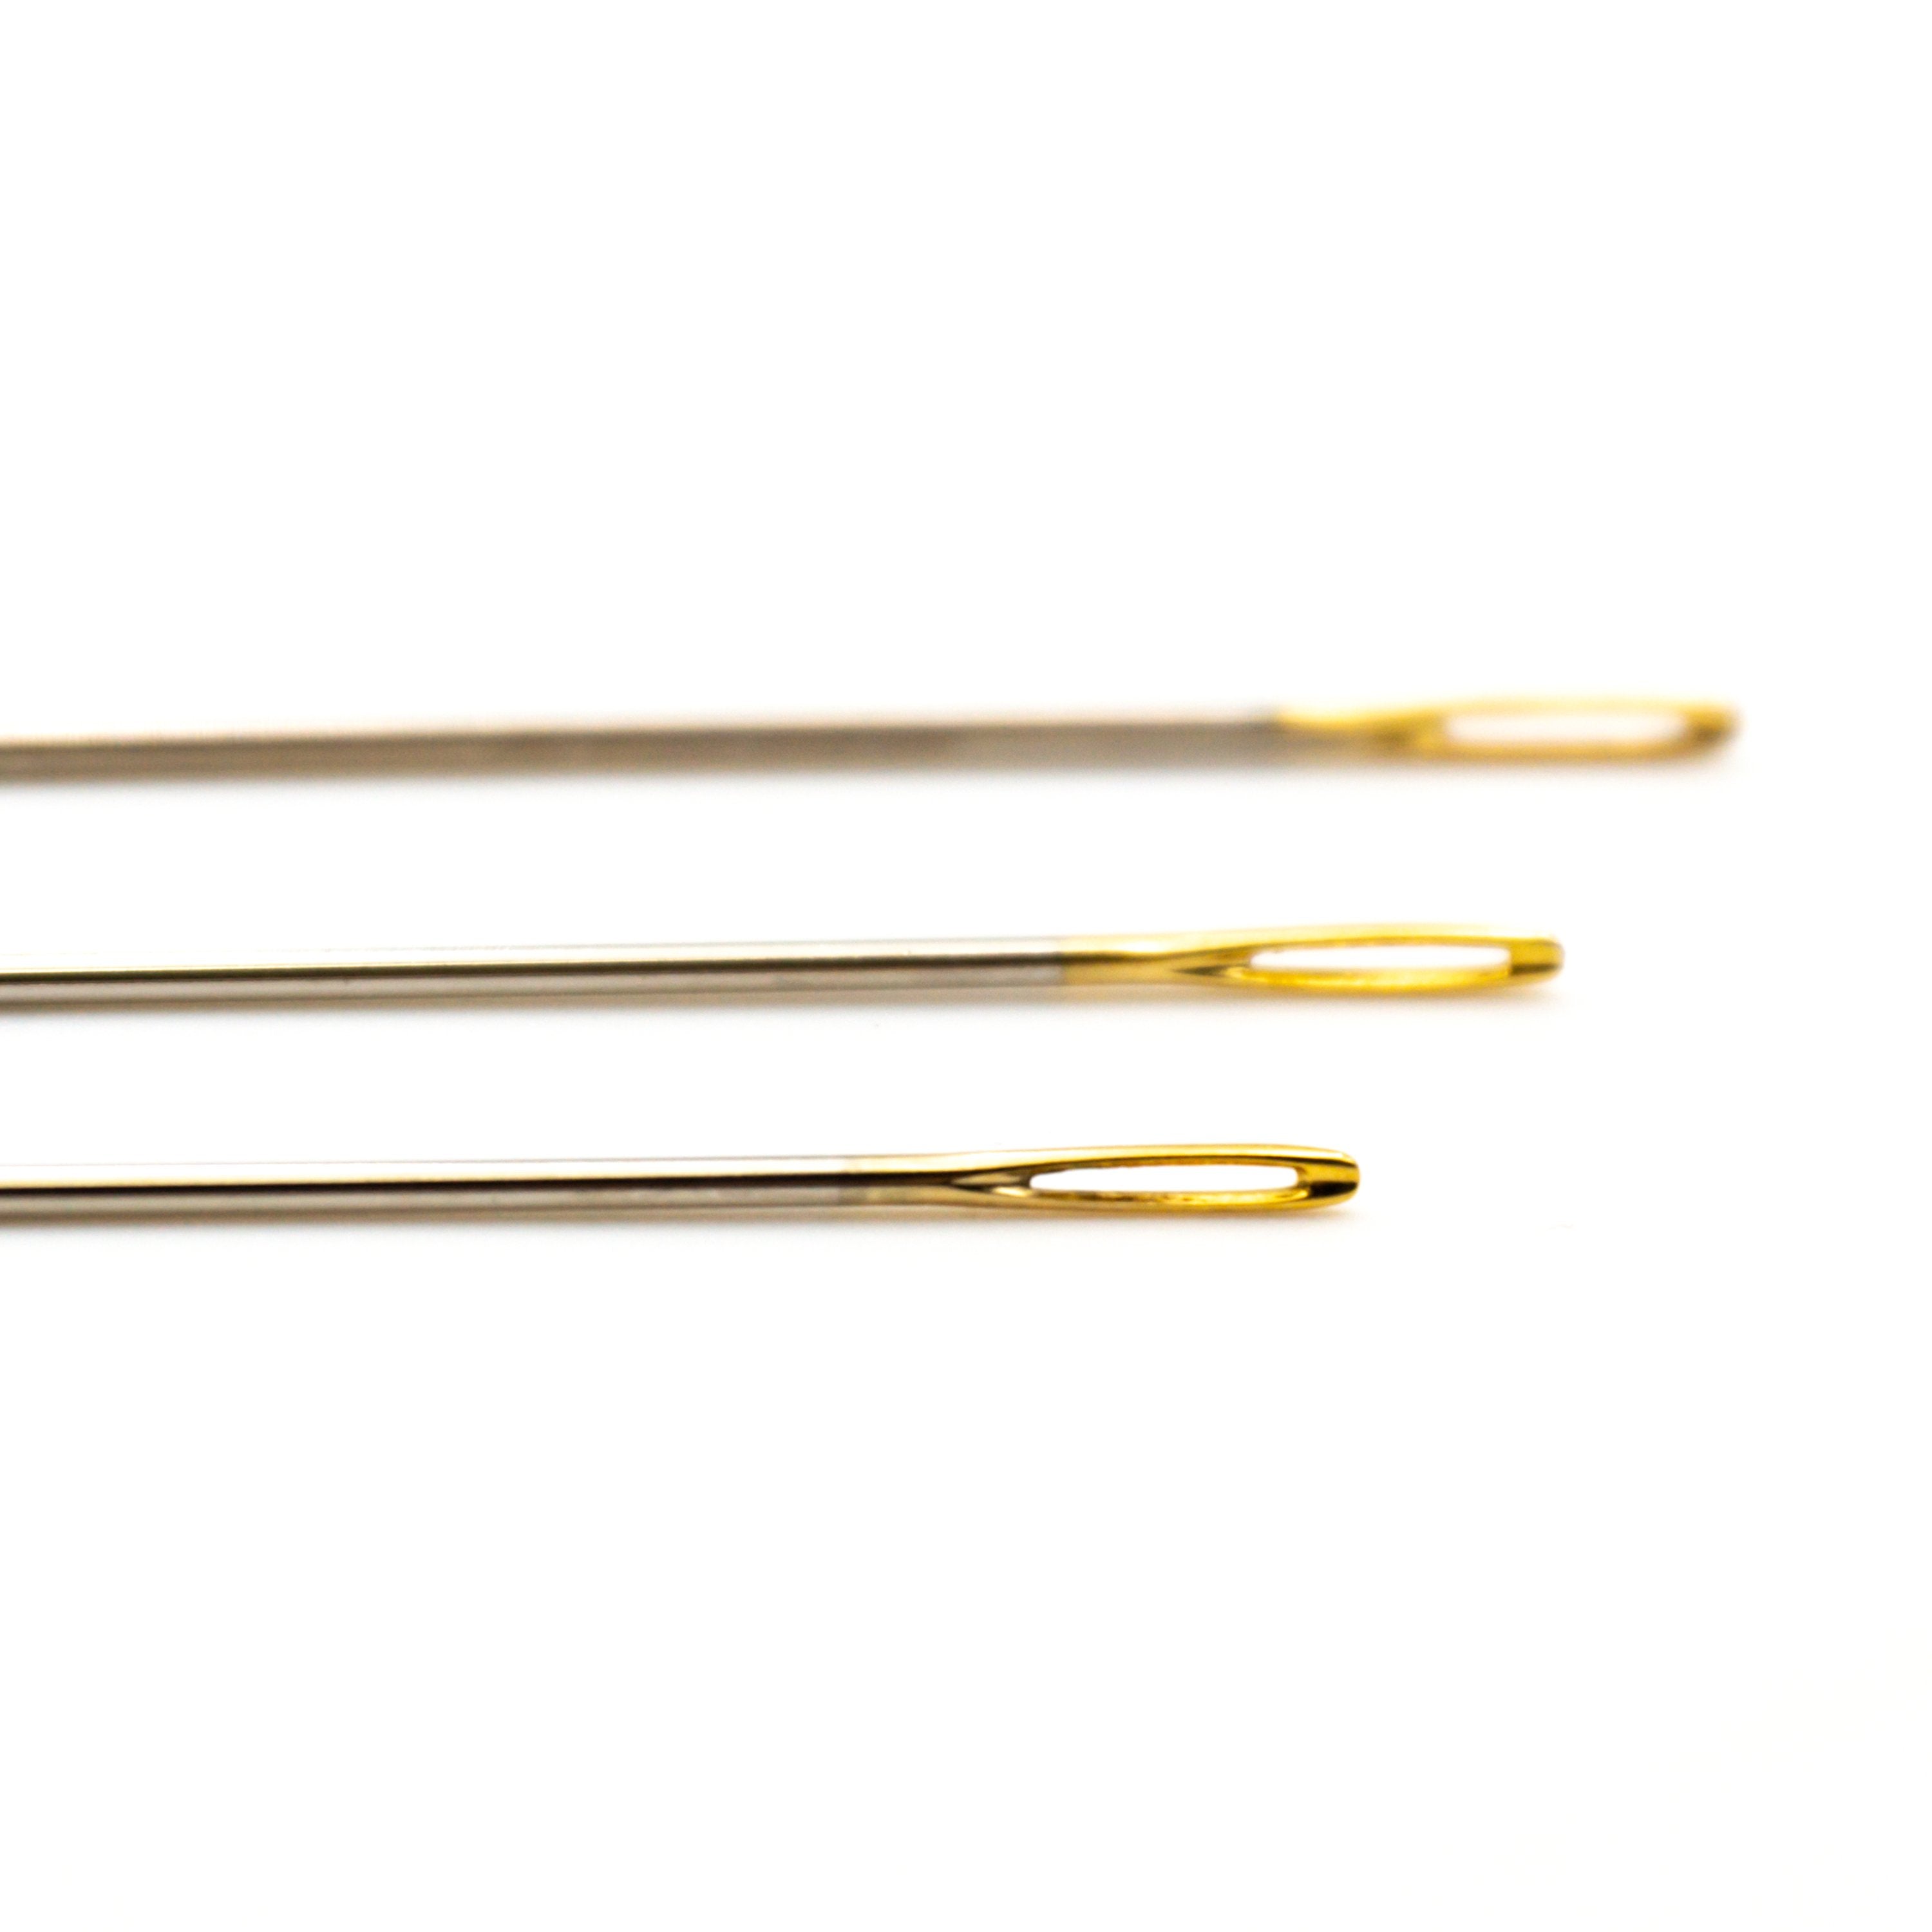 METAL TAPESTRY NEEDLE - 3 PIECES